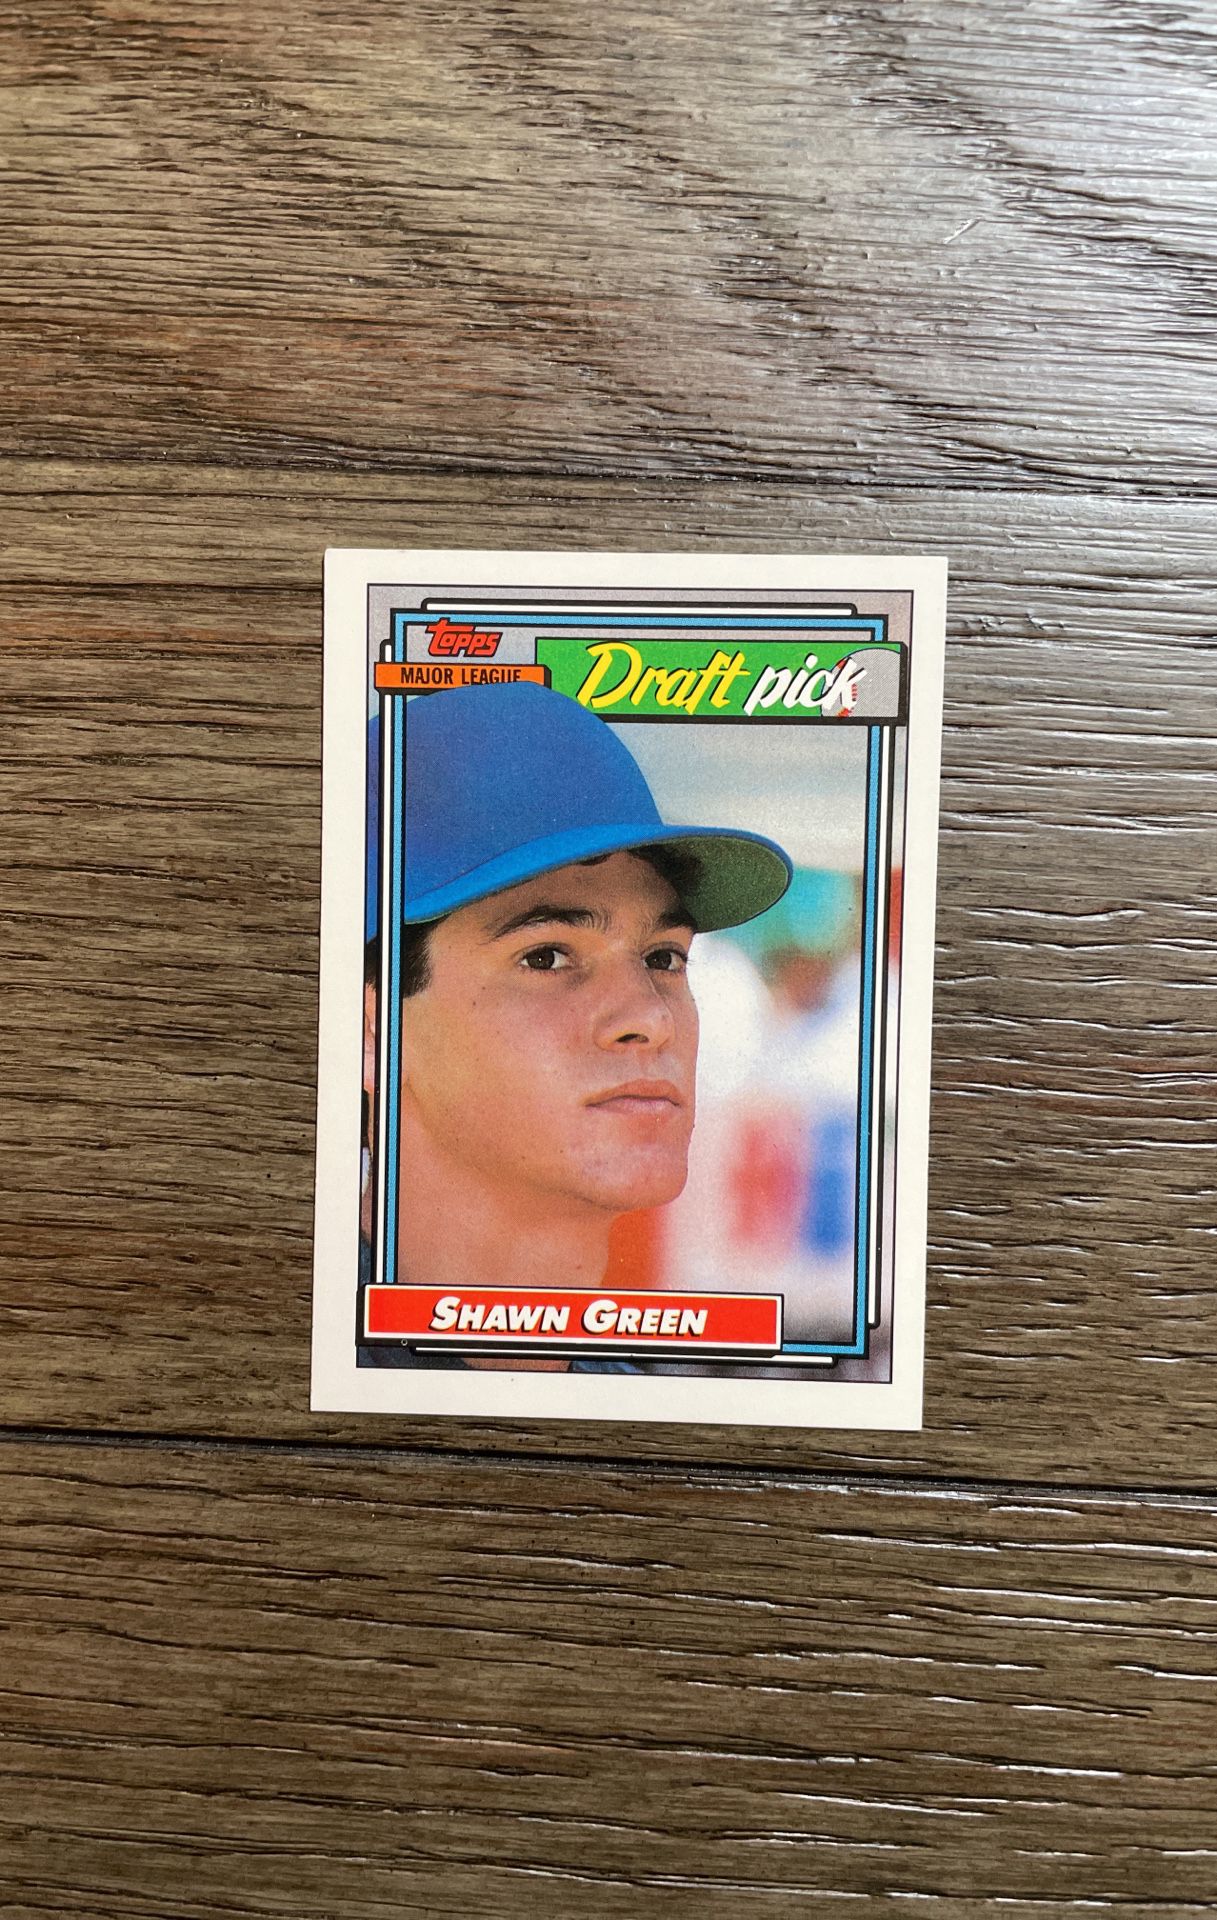 1992 Shawn Green Draft Pick Topps Baseball Card #276 for Sale in Orange, CA  - OfferUp